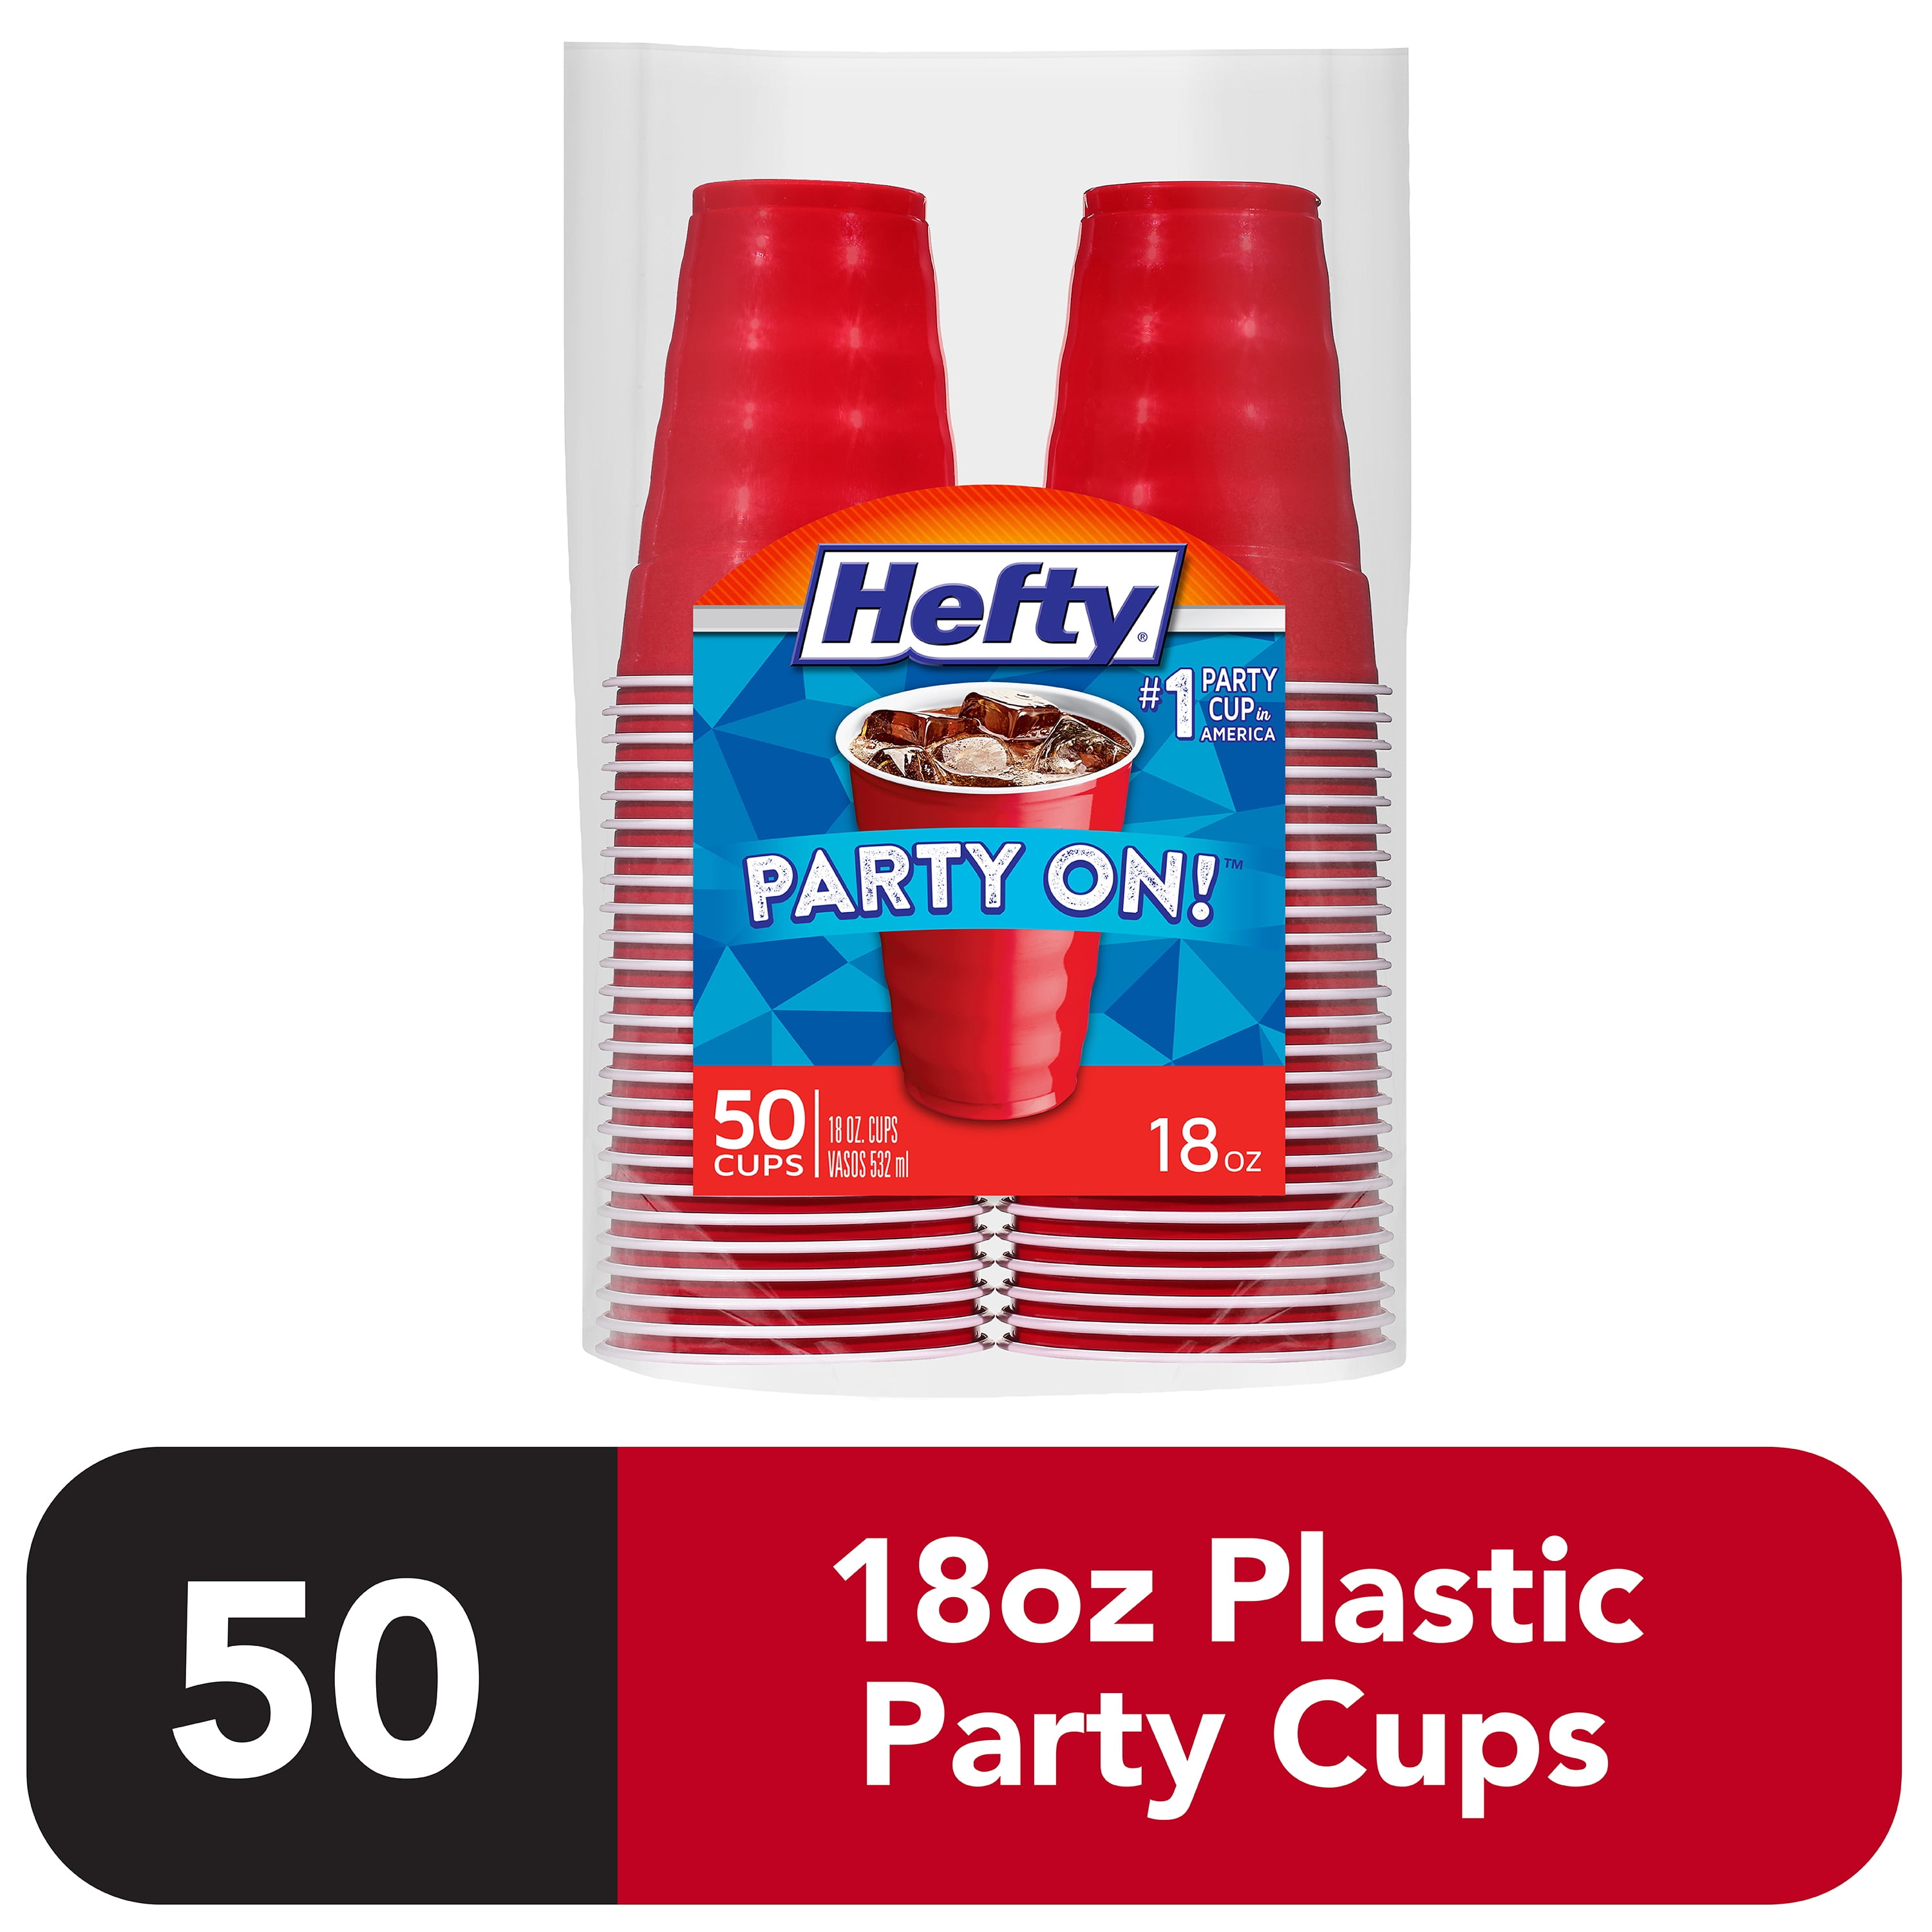 Hefty Party On! Cups, 18 Ounce - 50 cups